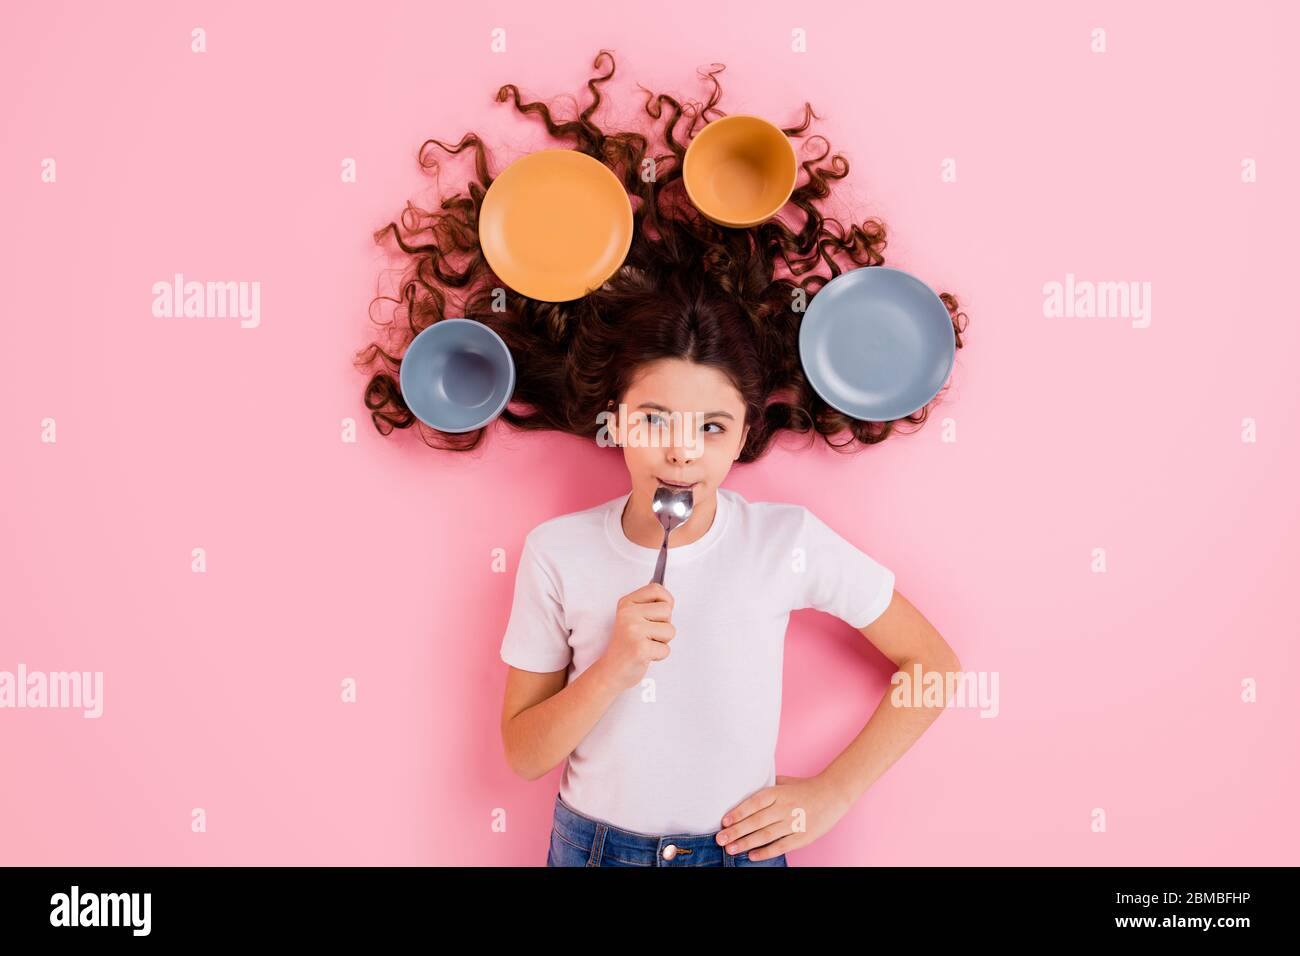 Top view above high angle flat lay flatlay lie concept portrait of her she nice attractive beautiful wavy-haired girl licking spoon dishes meal Stock Photo